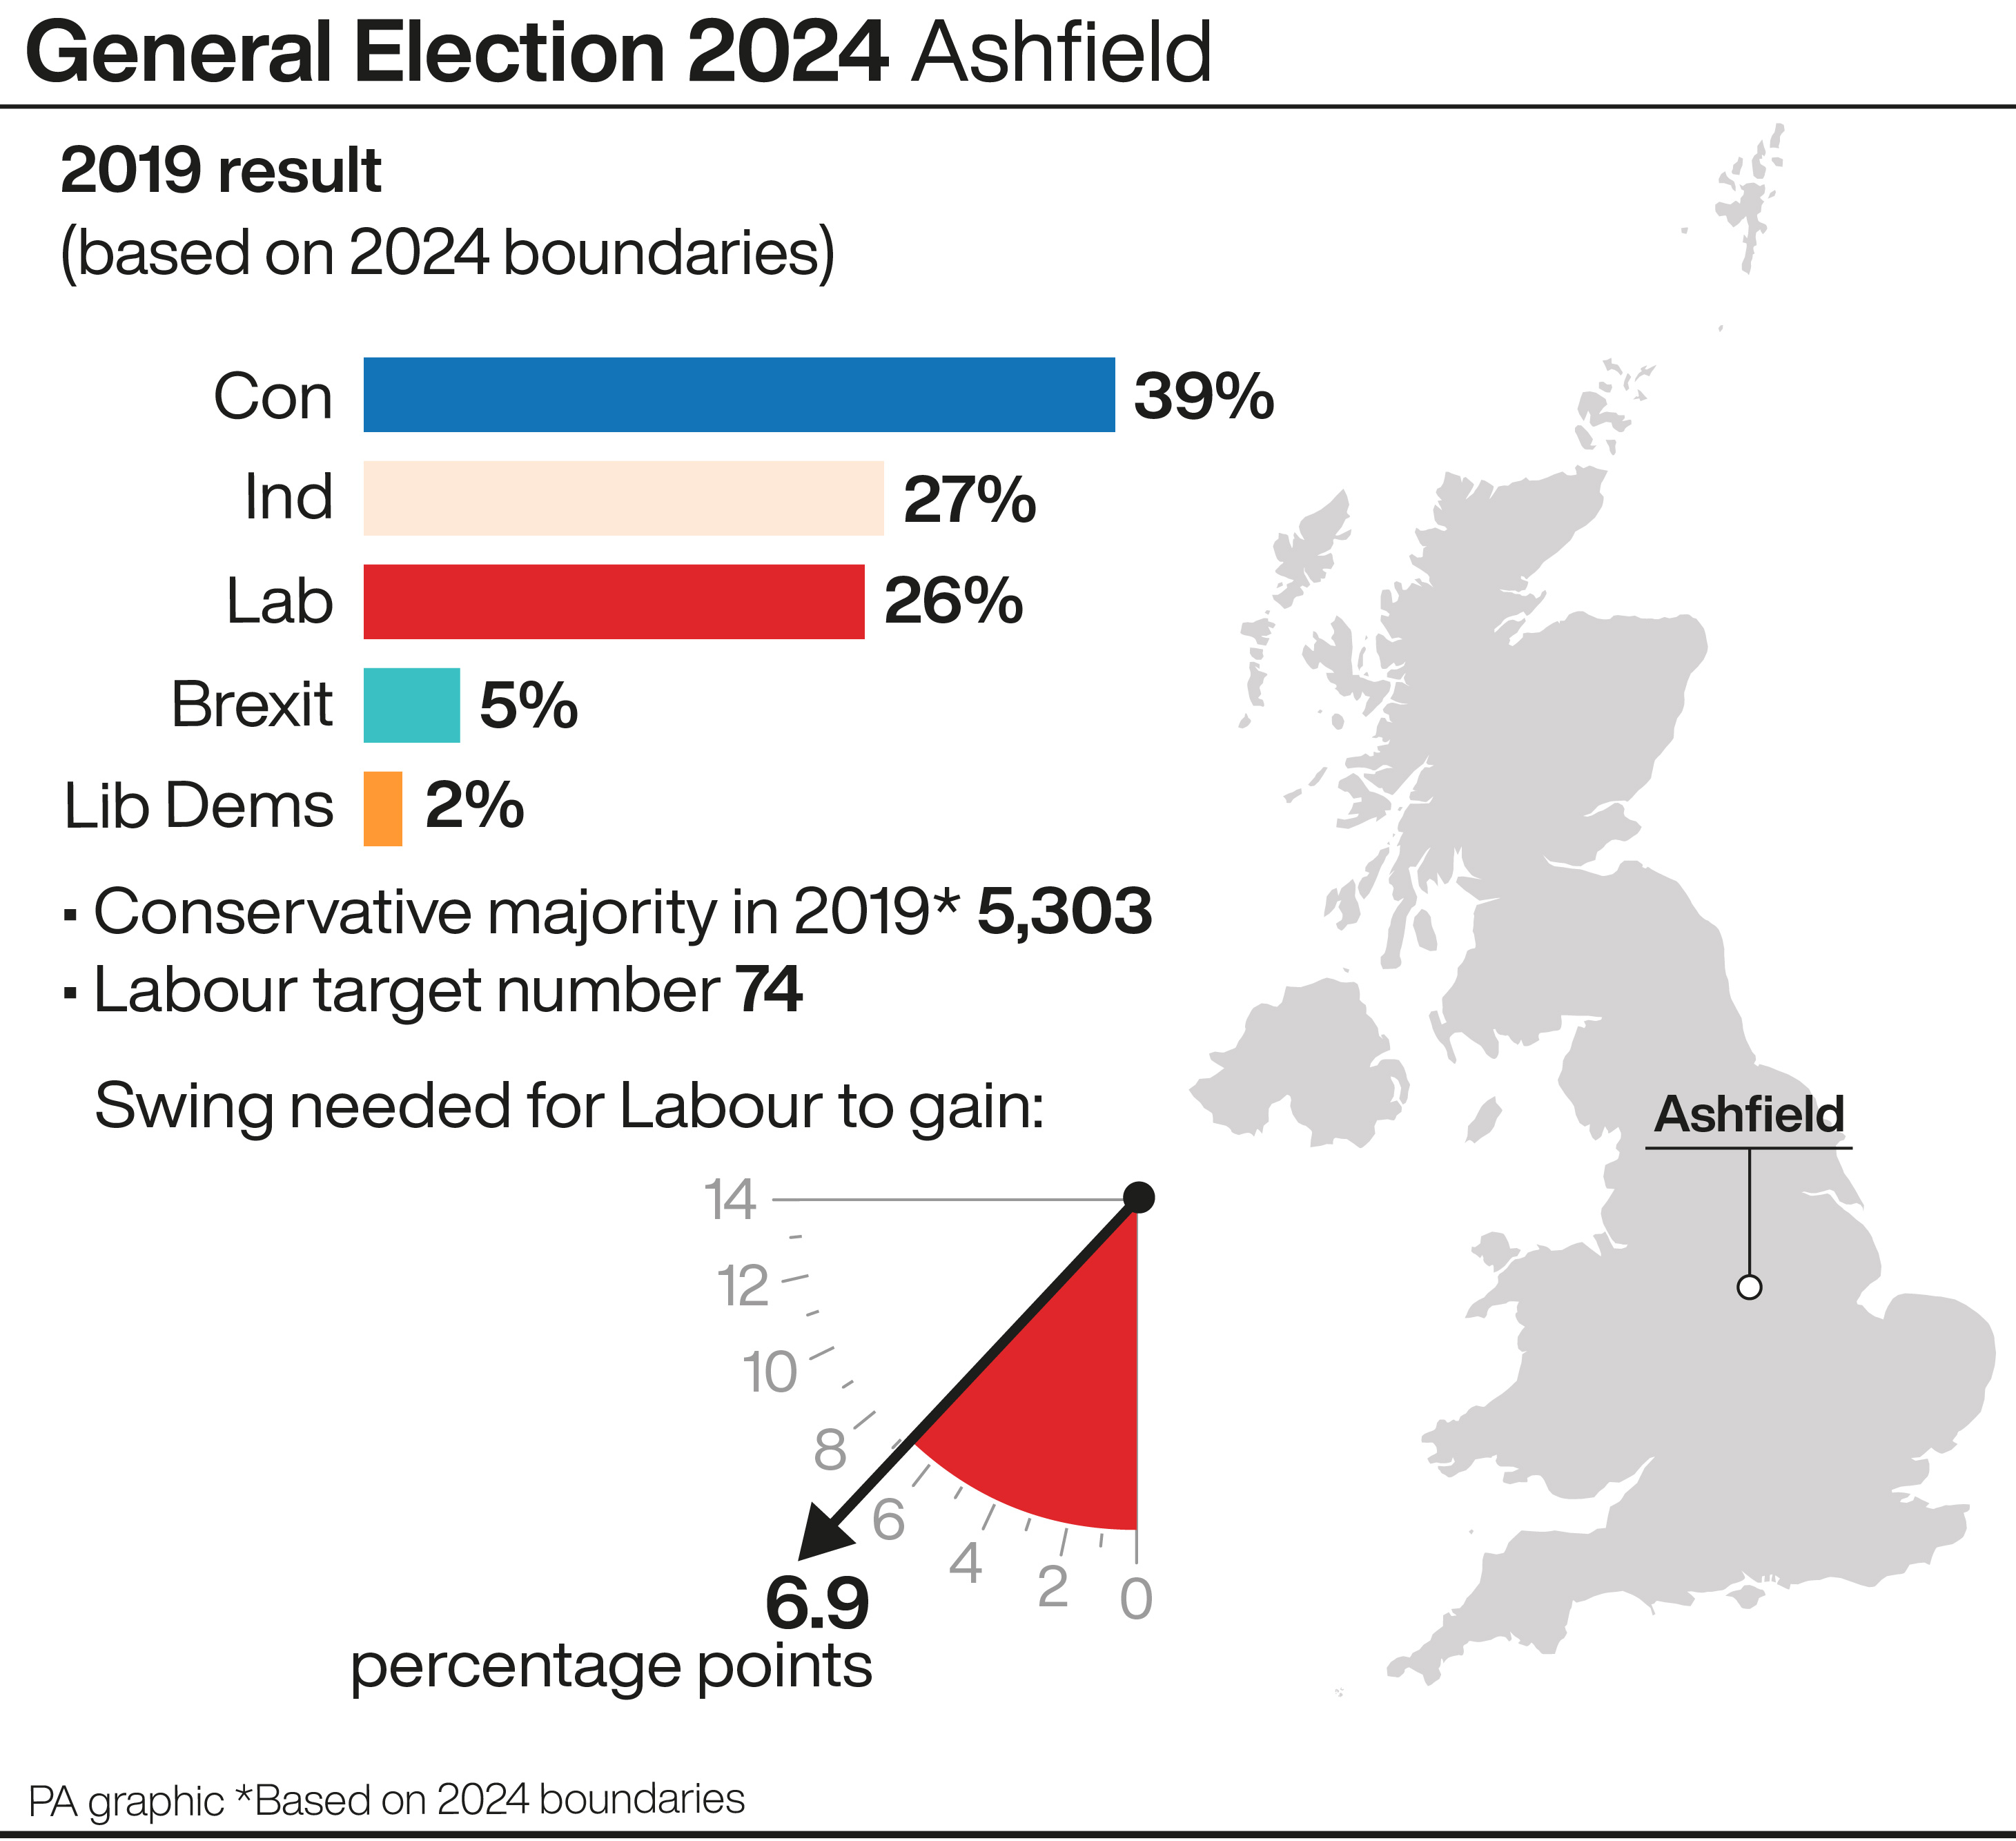 A profile of the constituency of Ashfield